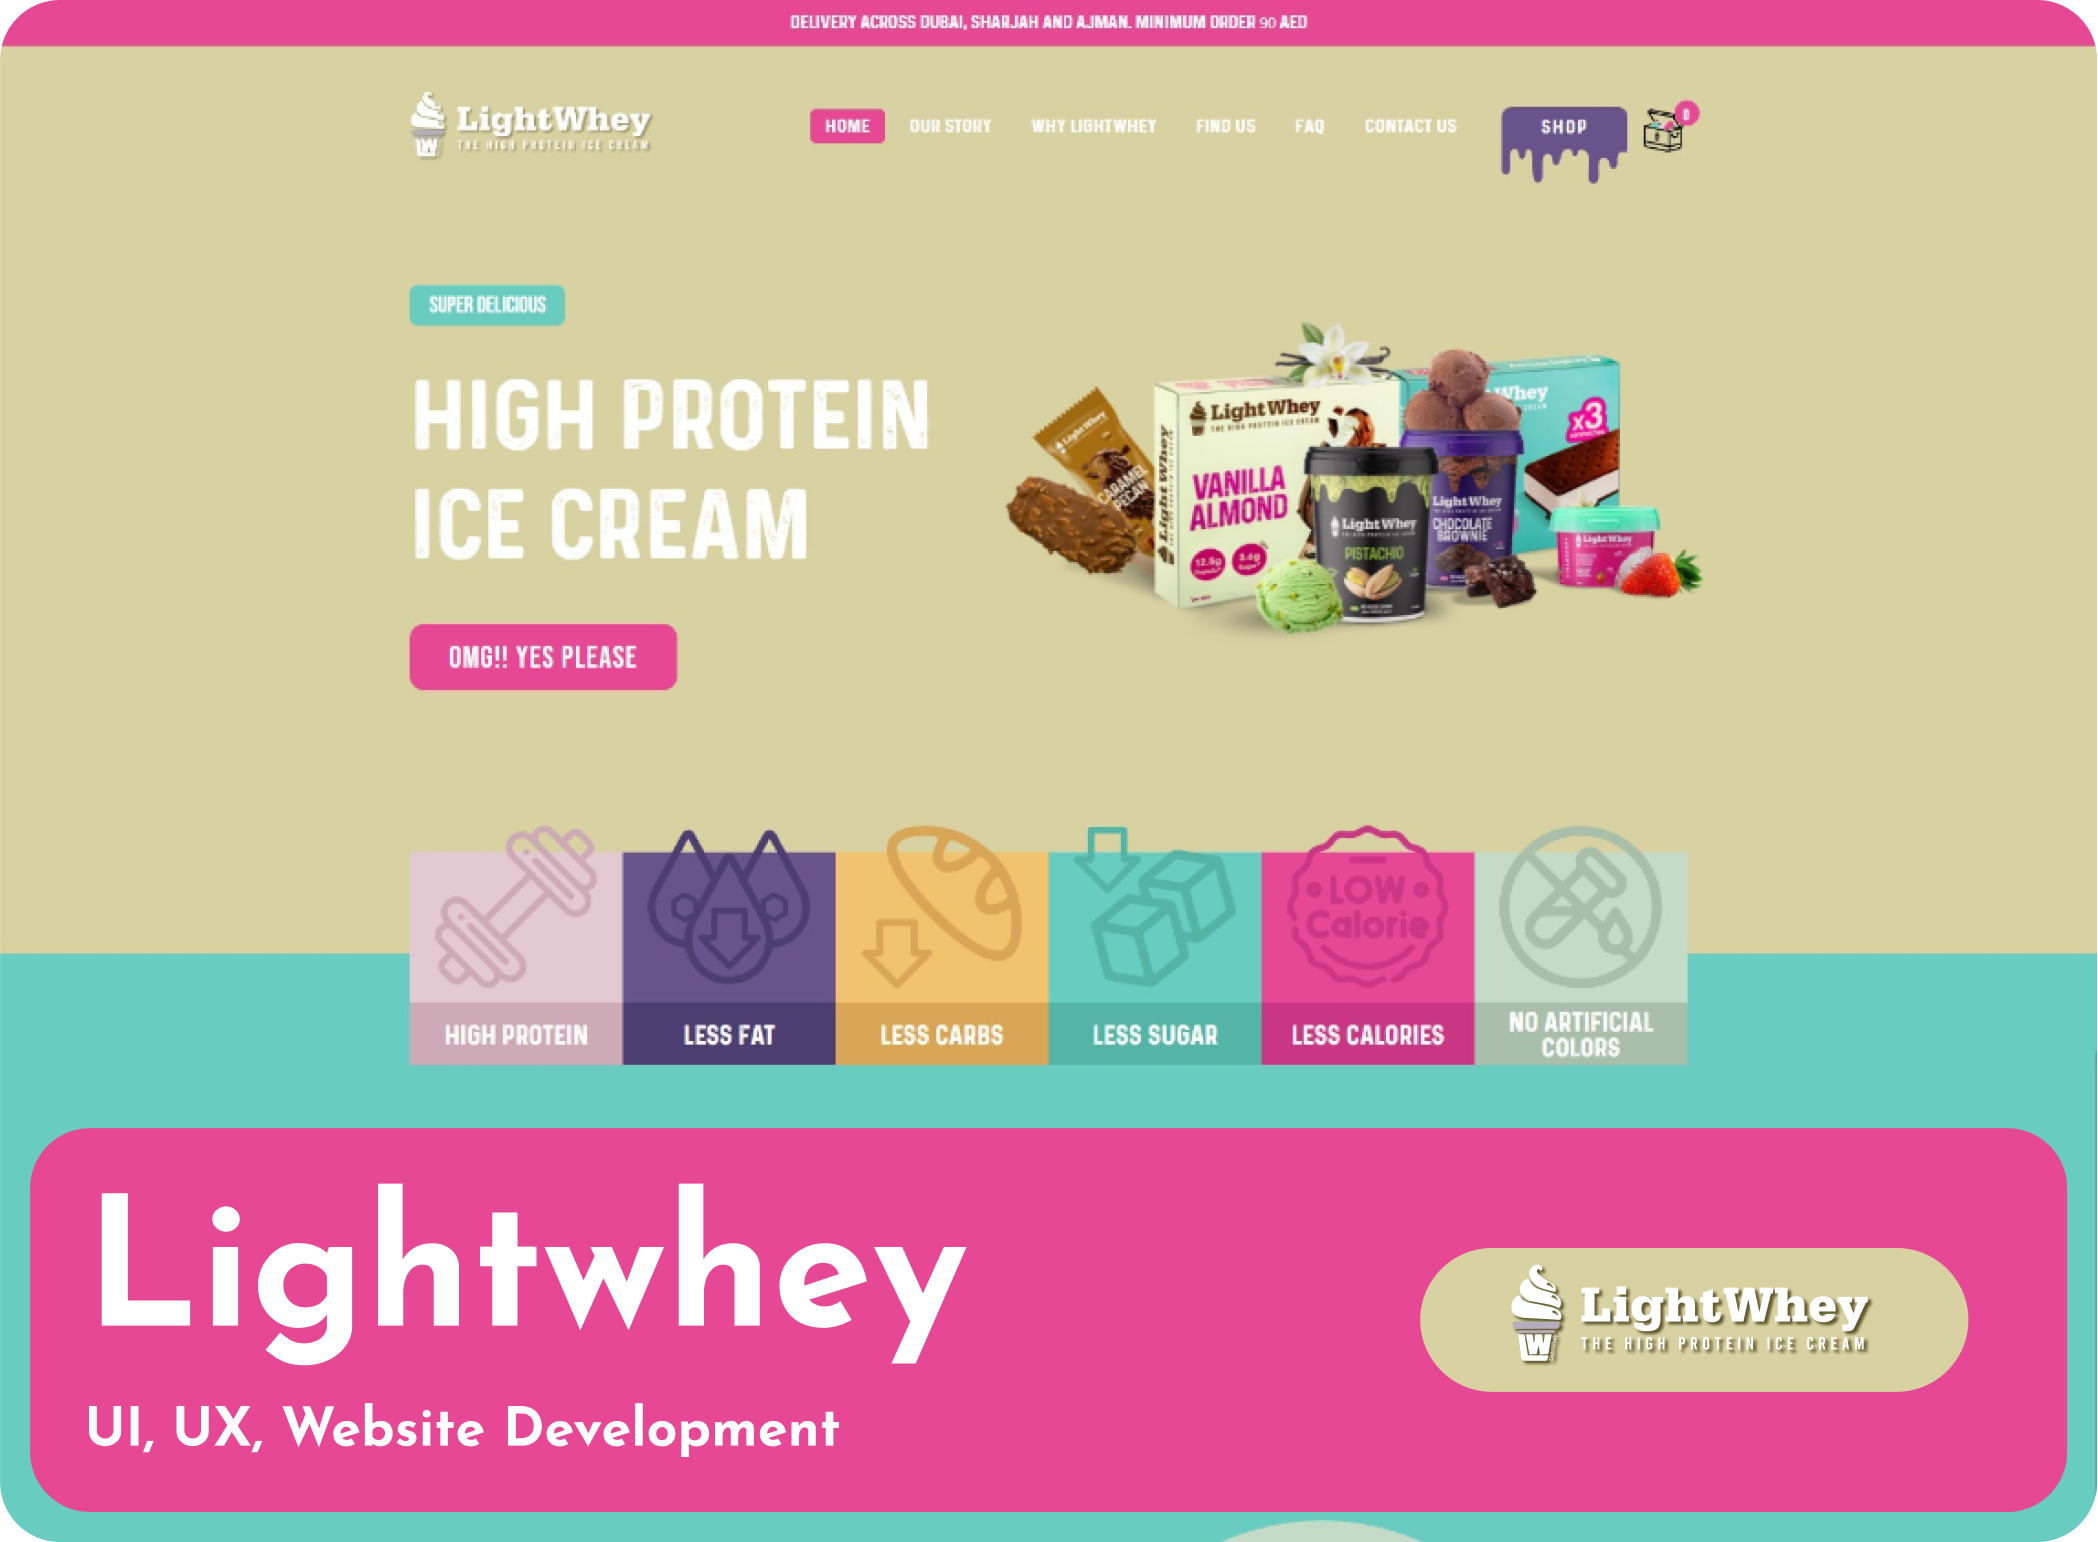 Lightwhey websited created by ALFYI designs